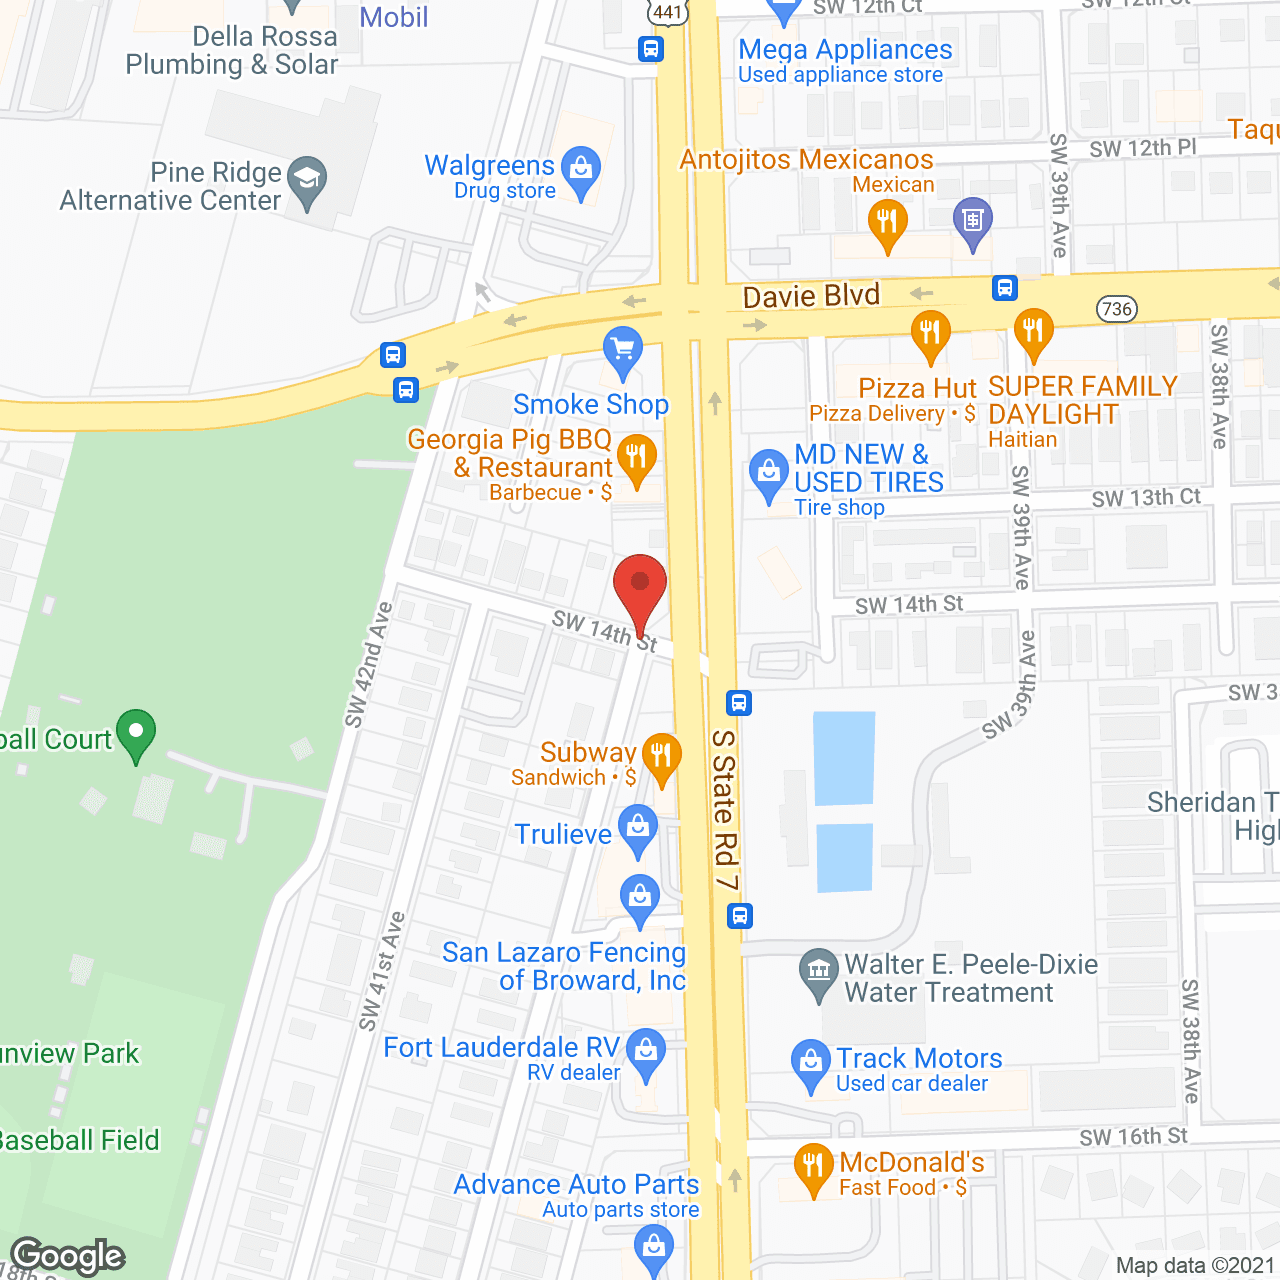 Golden Age Manor Assisted Living Facility in google map